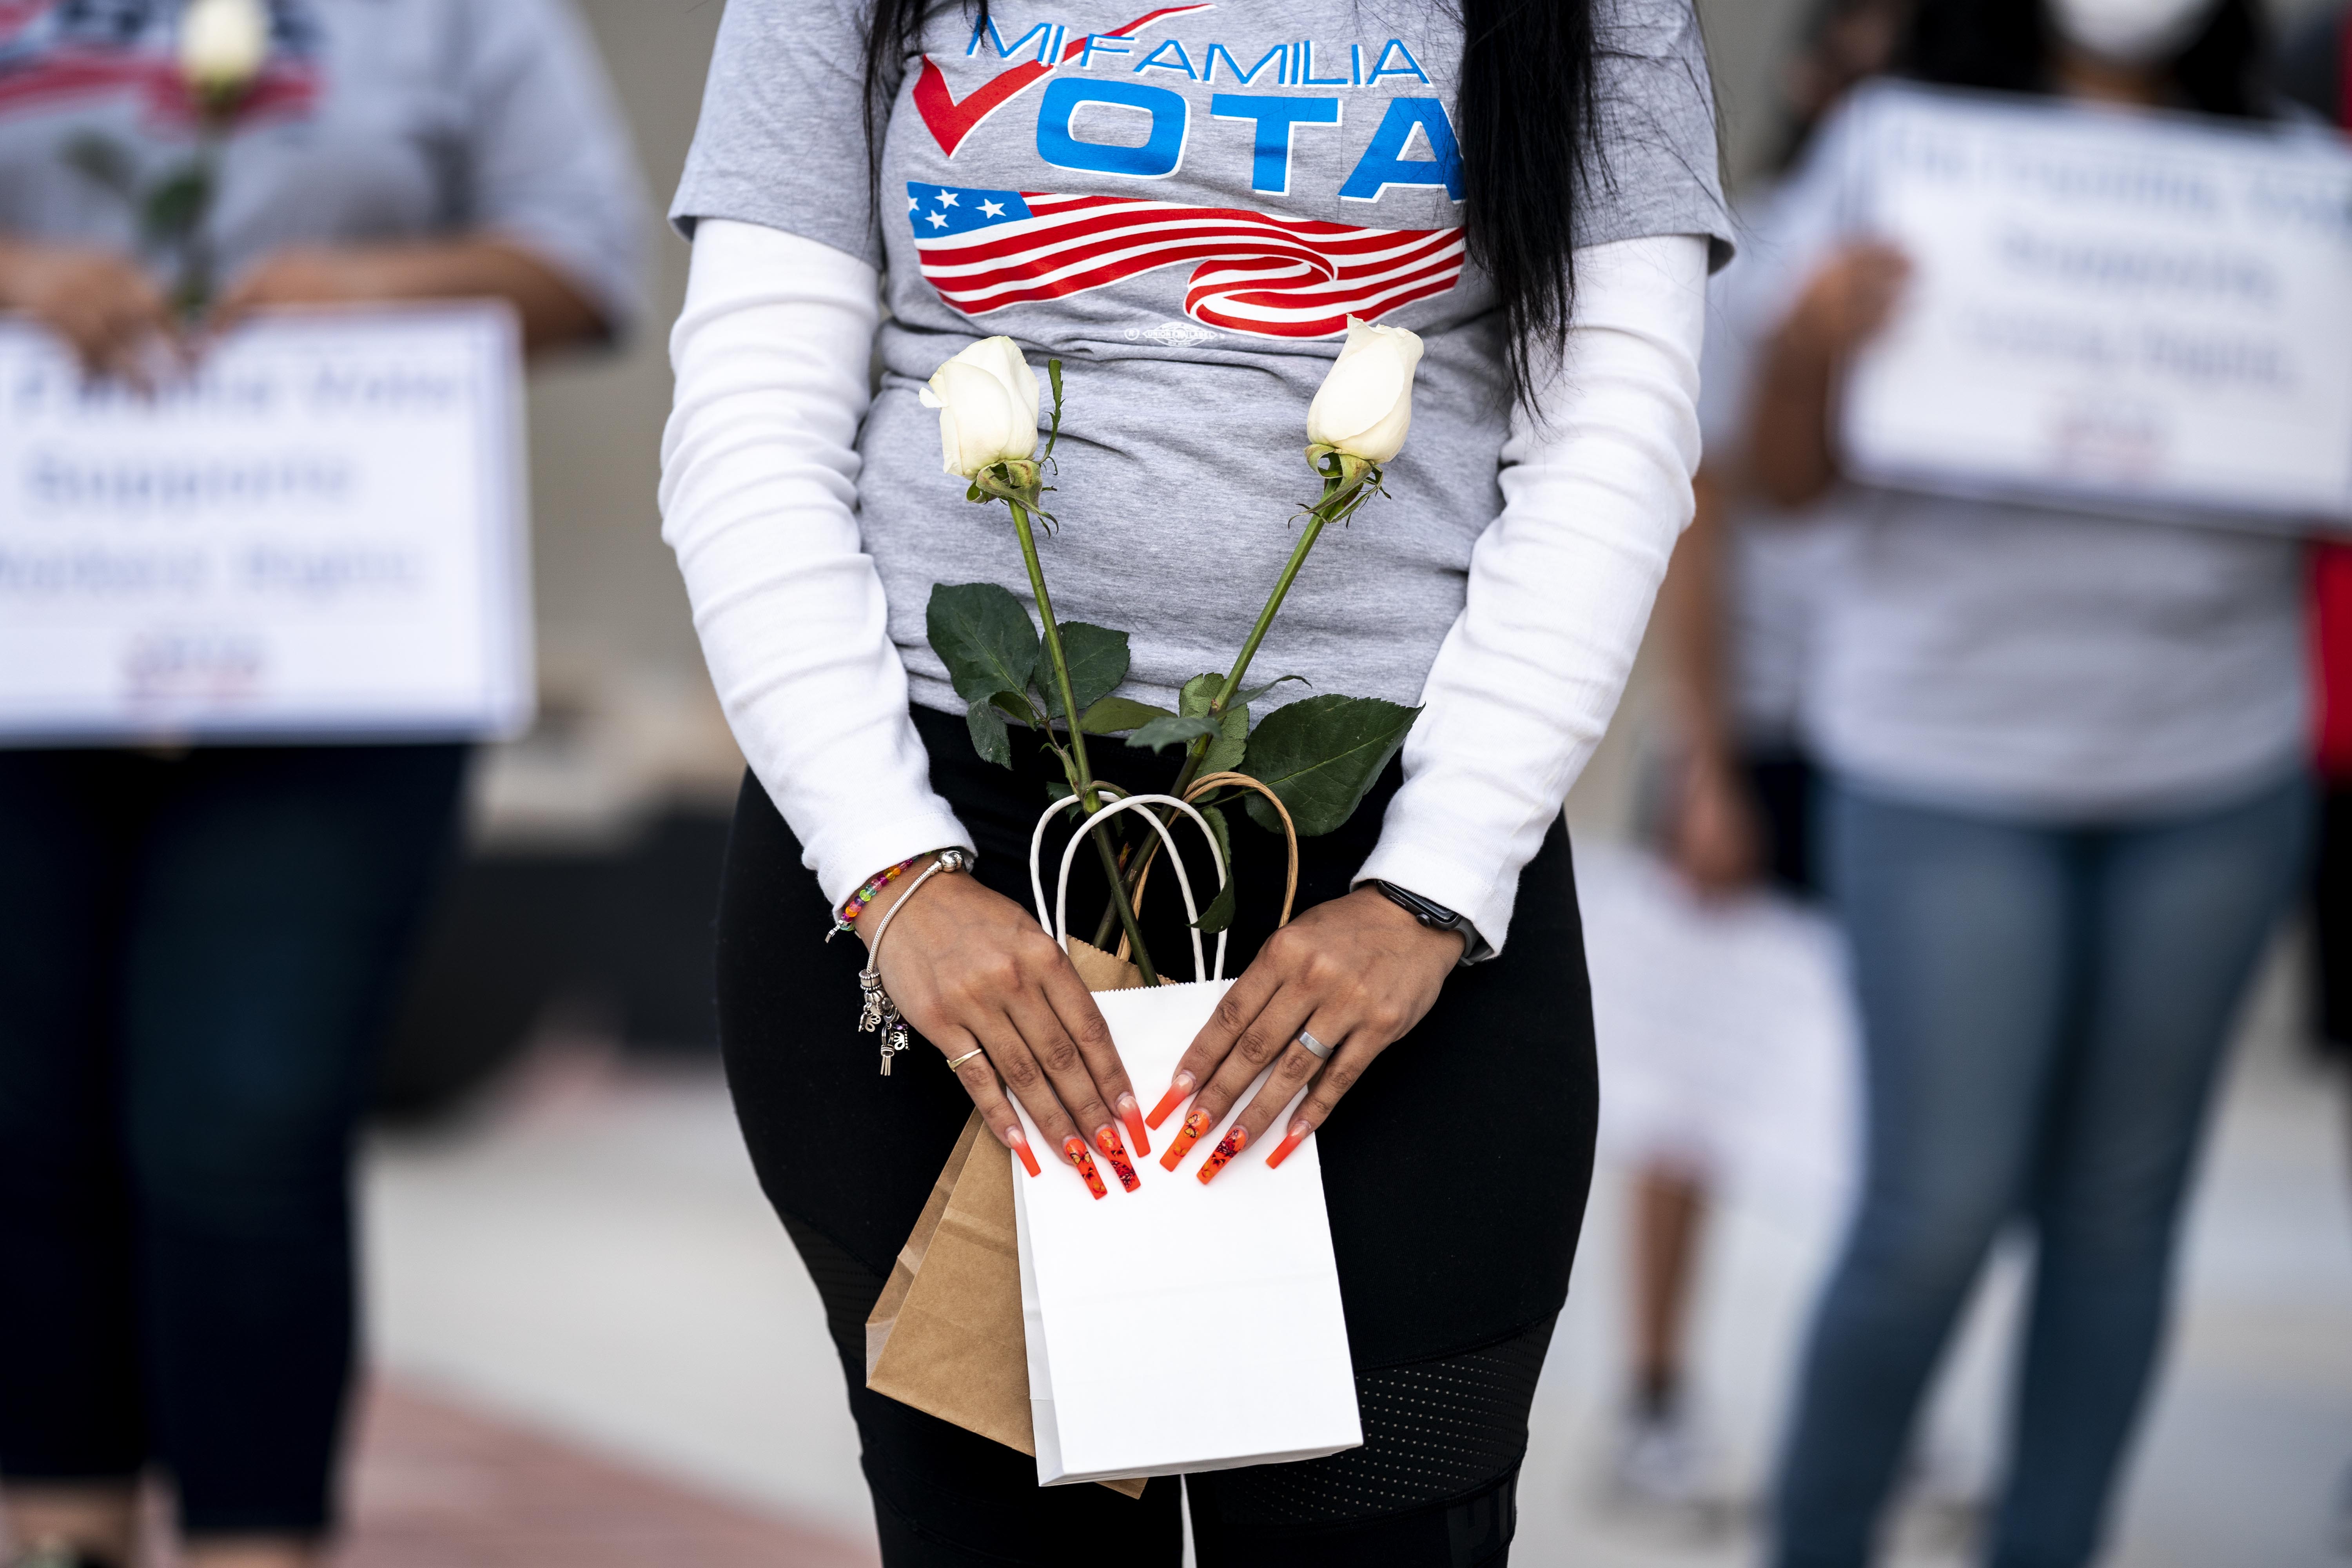 A Latina woman wearing a shirt that reads “Mi Familia Vota” and carrying two small bags with a white long-stem rose in each.